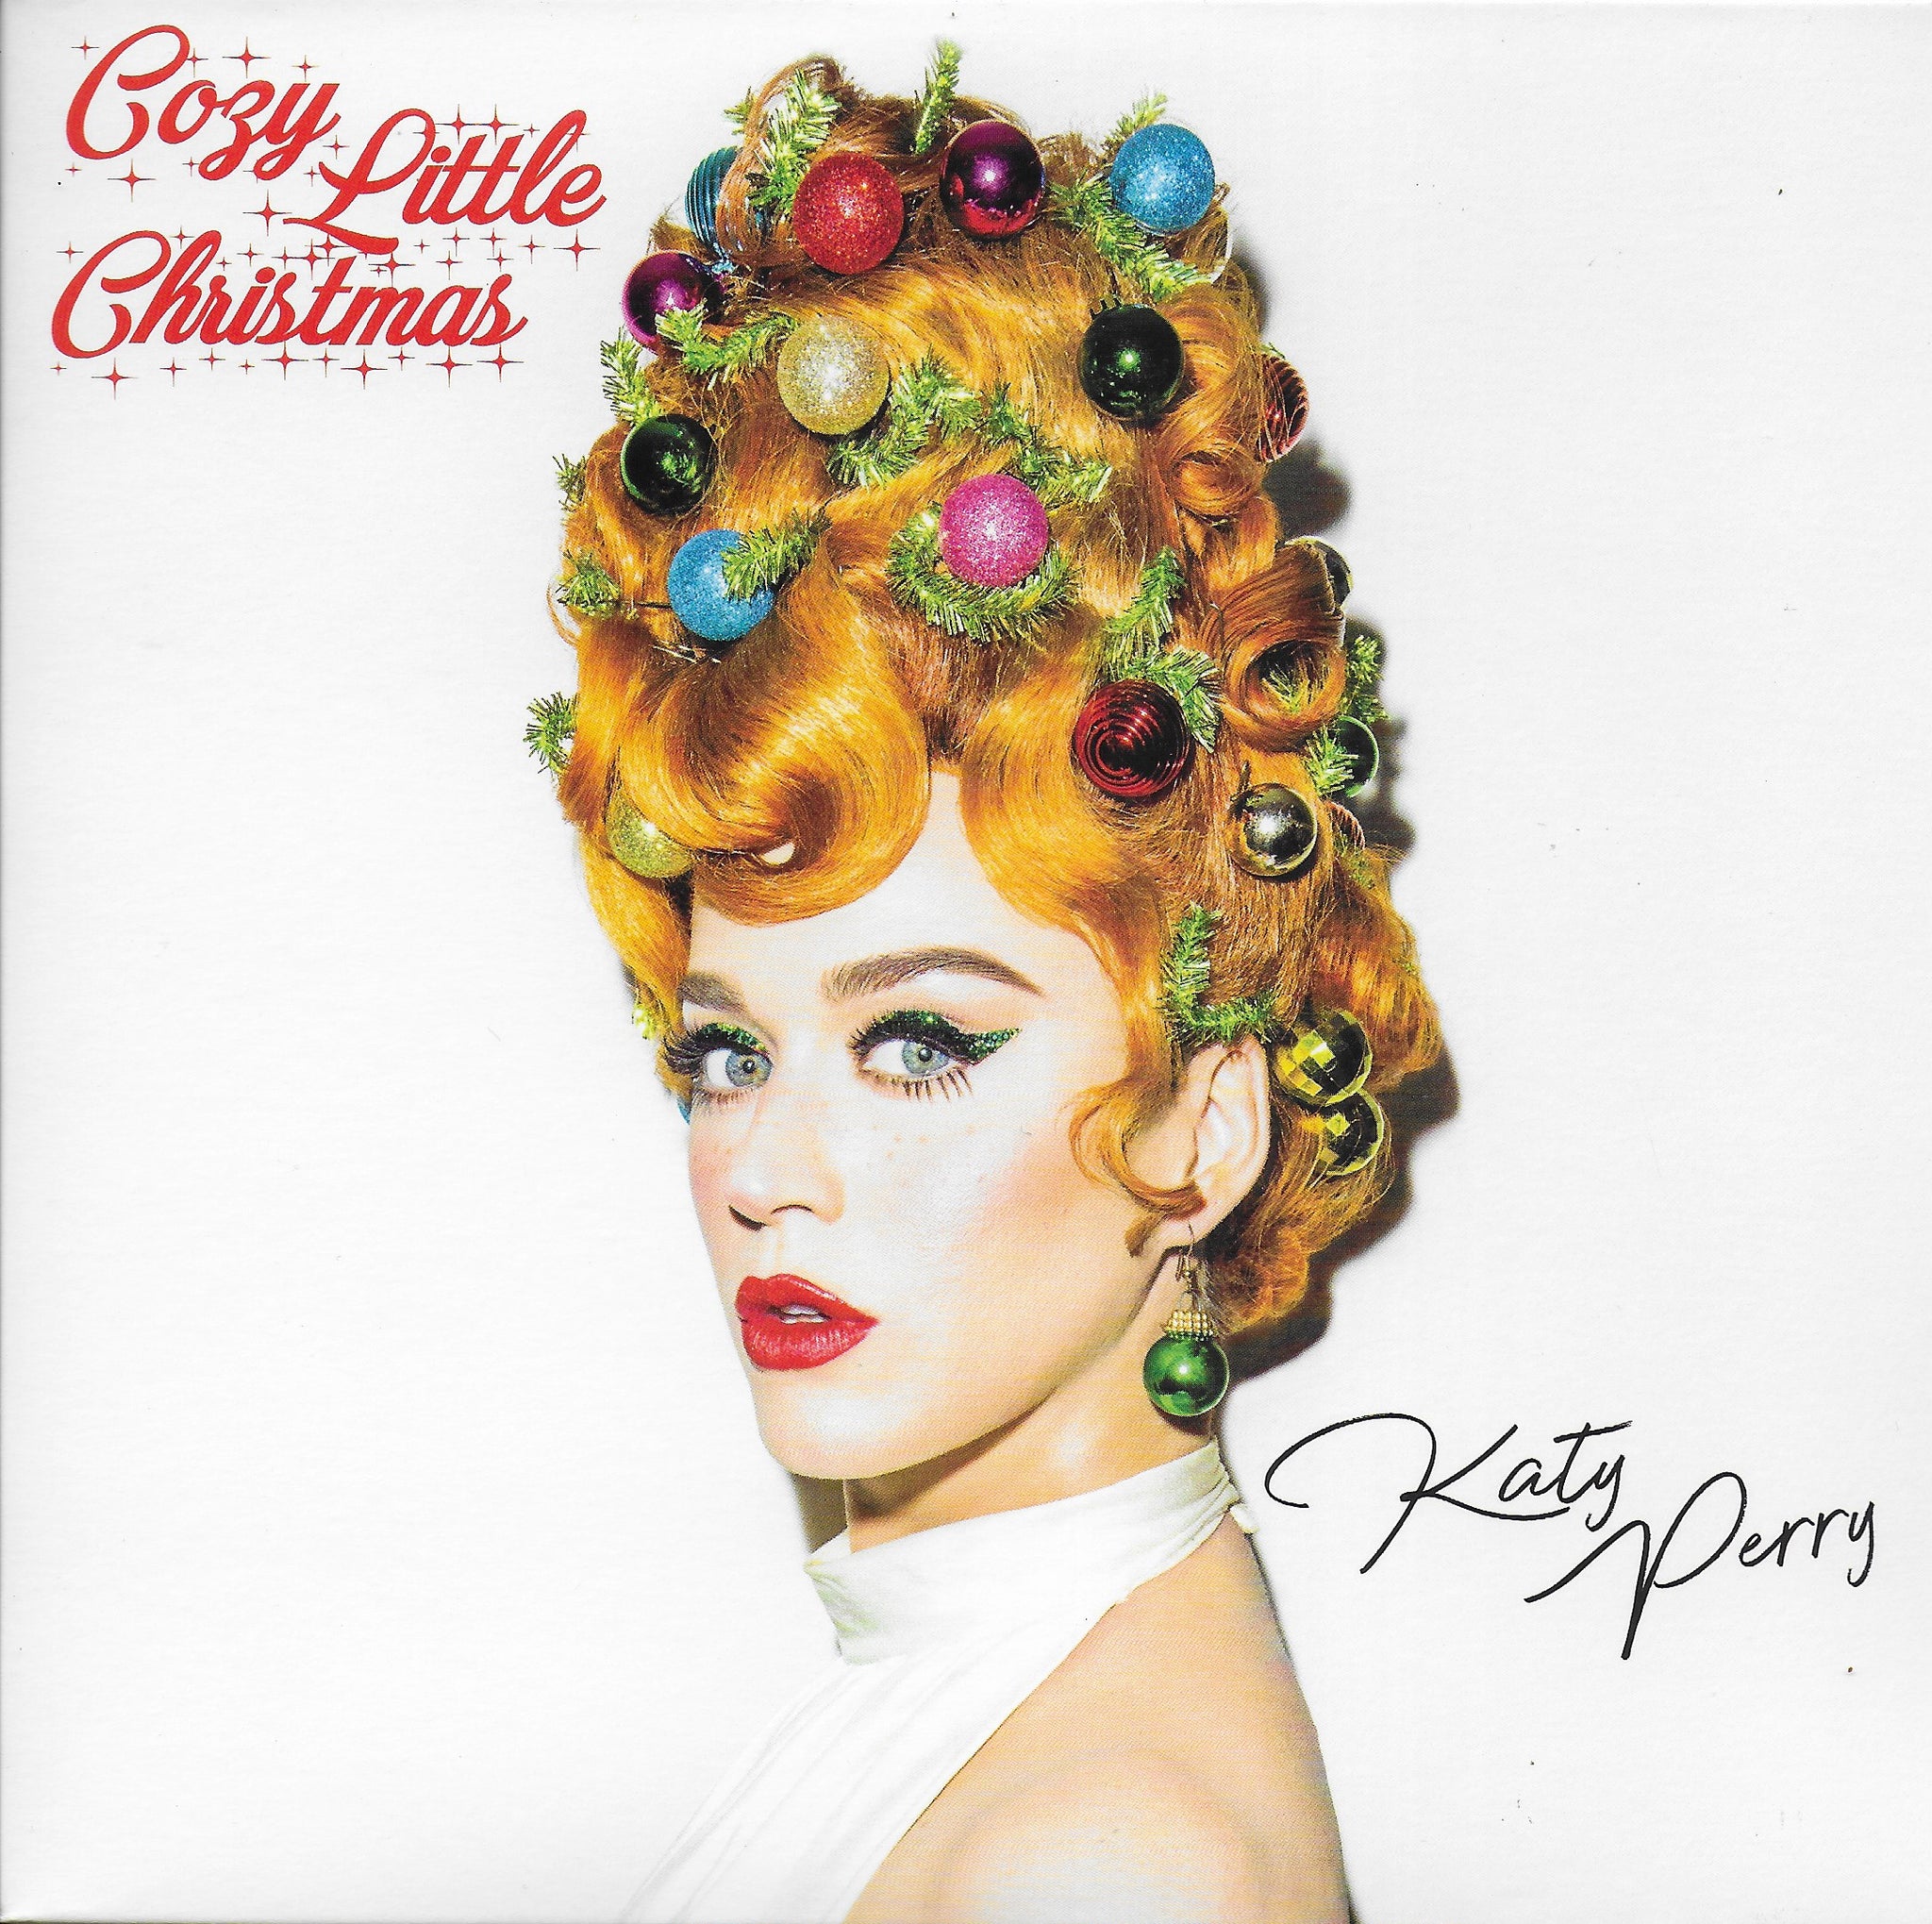 Katy Perry - Cozy little Christmas (Limited edition, green vinyl)